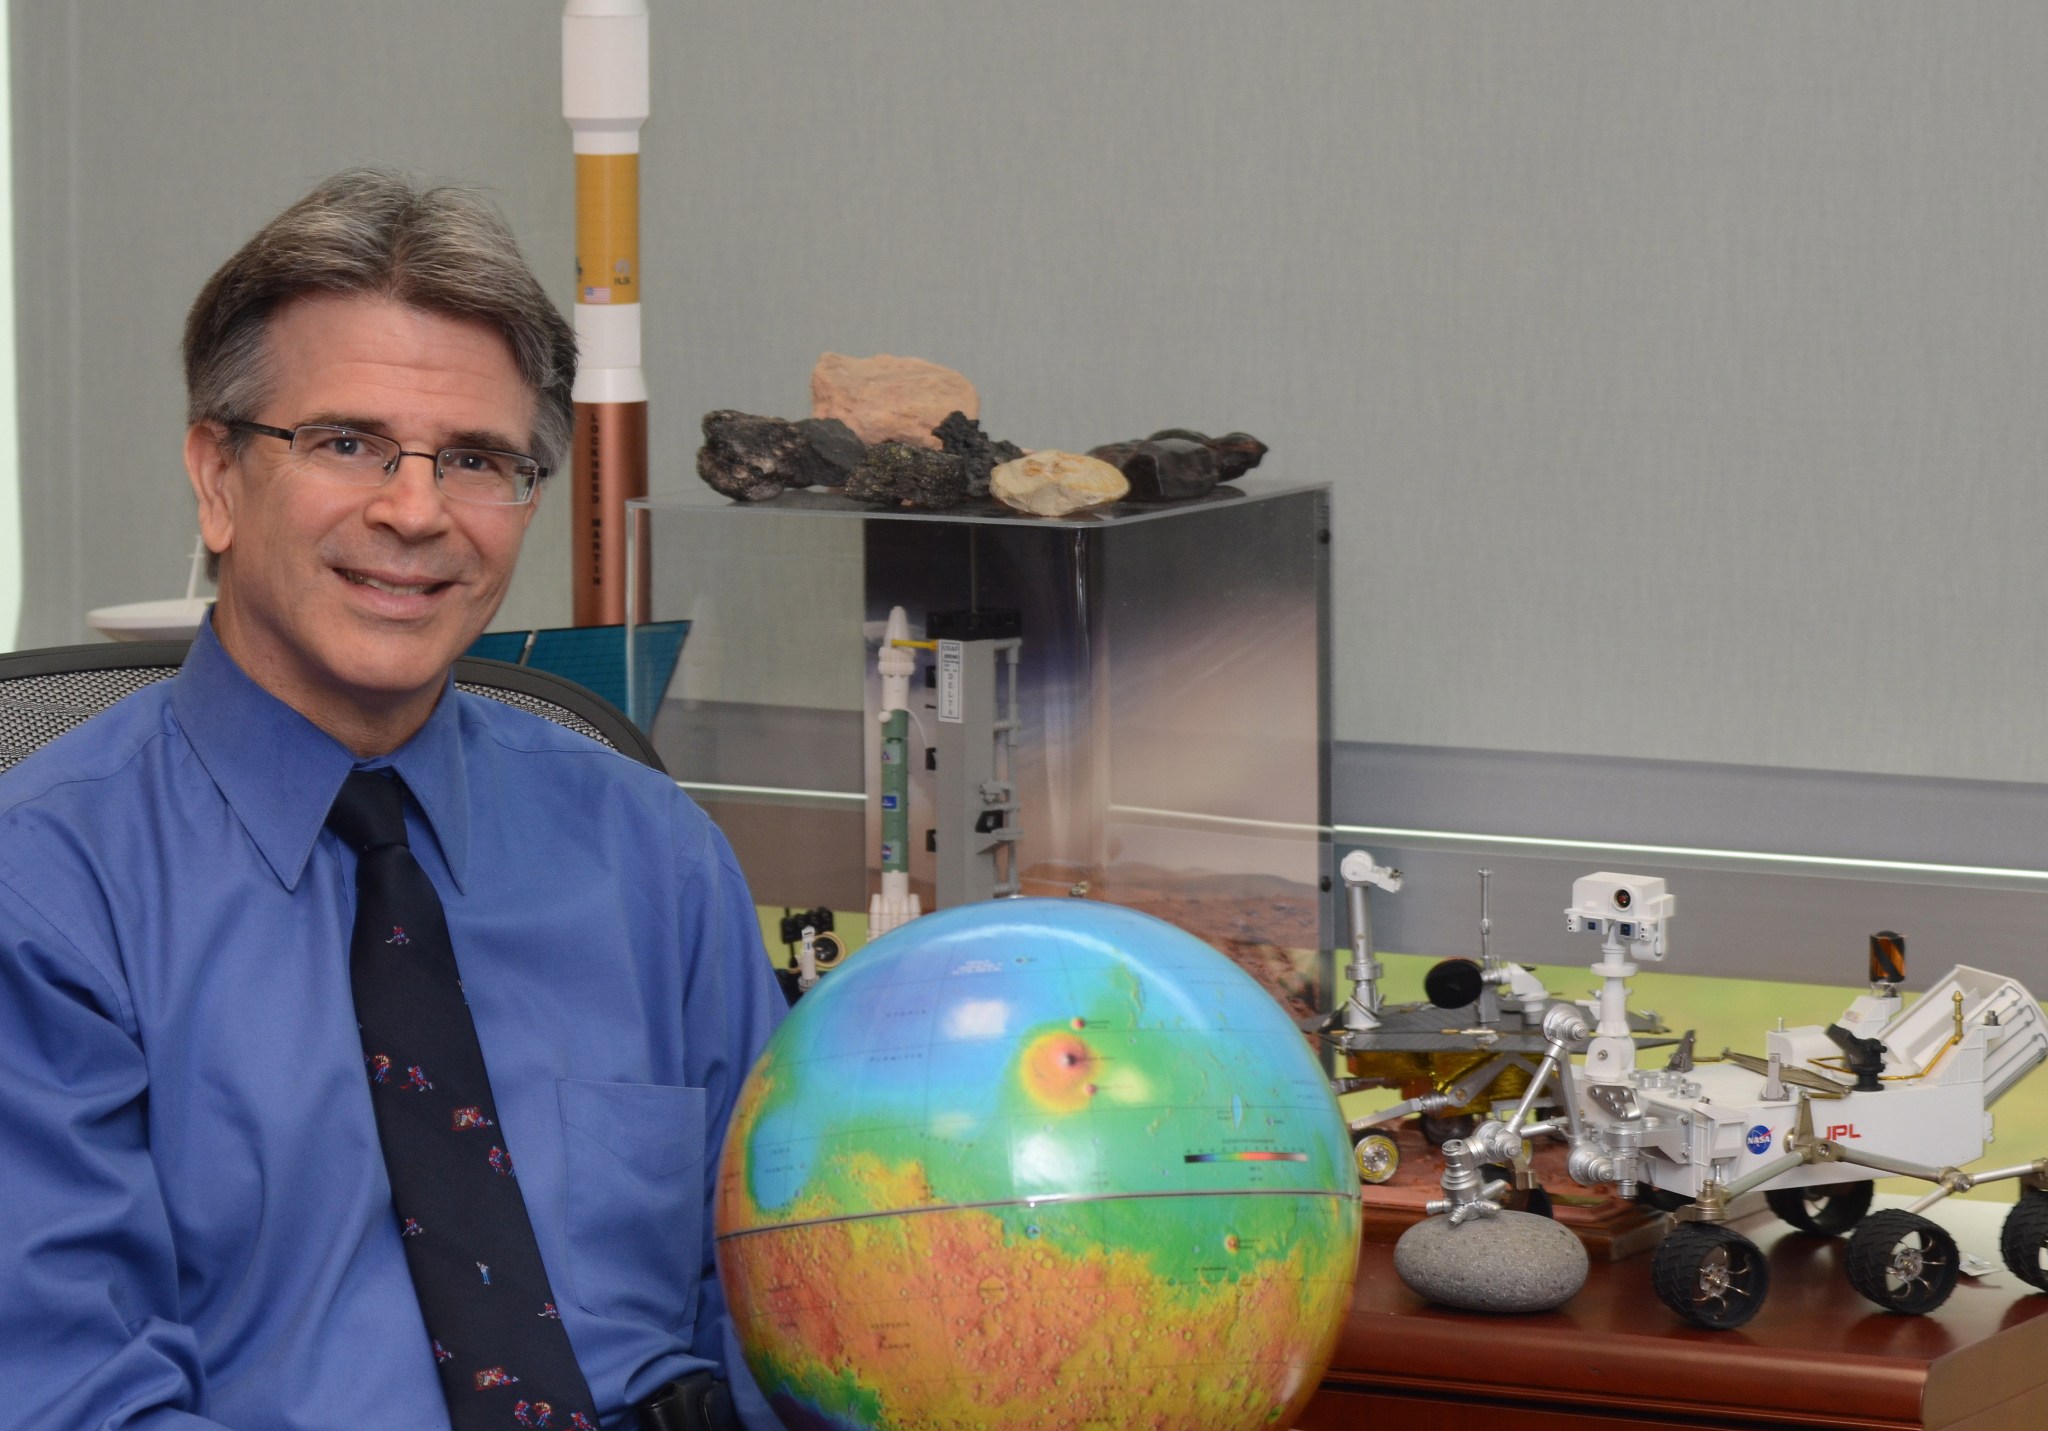 Garvin in his office next to a model of the Mars Orbiter Laser Altimeter (MOLA), a 1980s experiment that employed the first lase